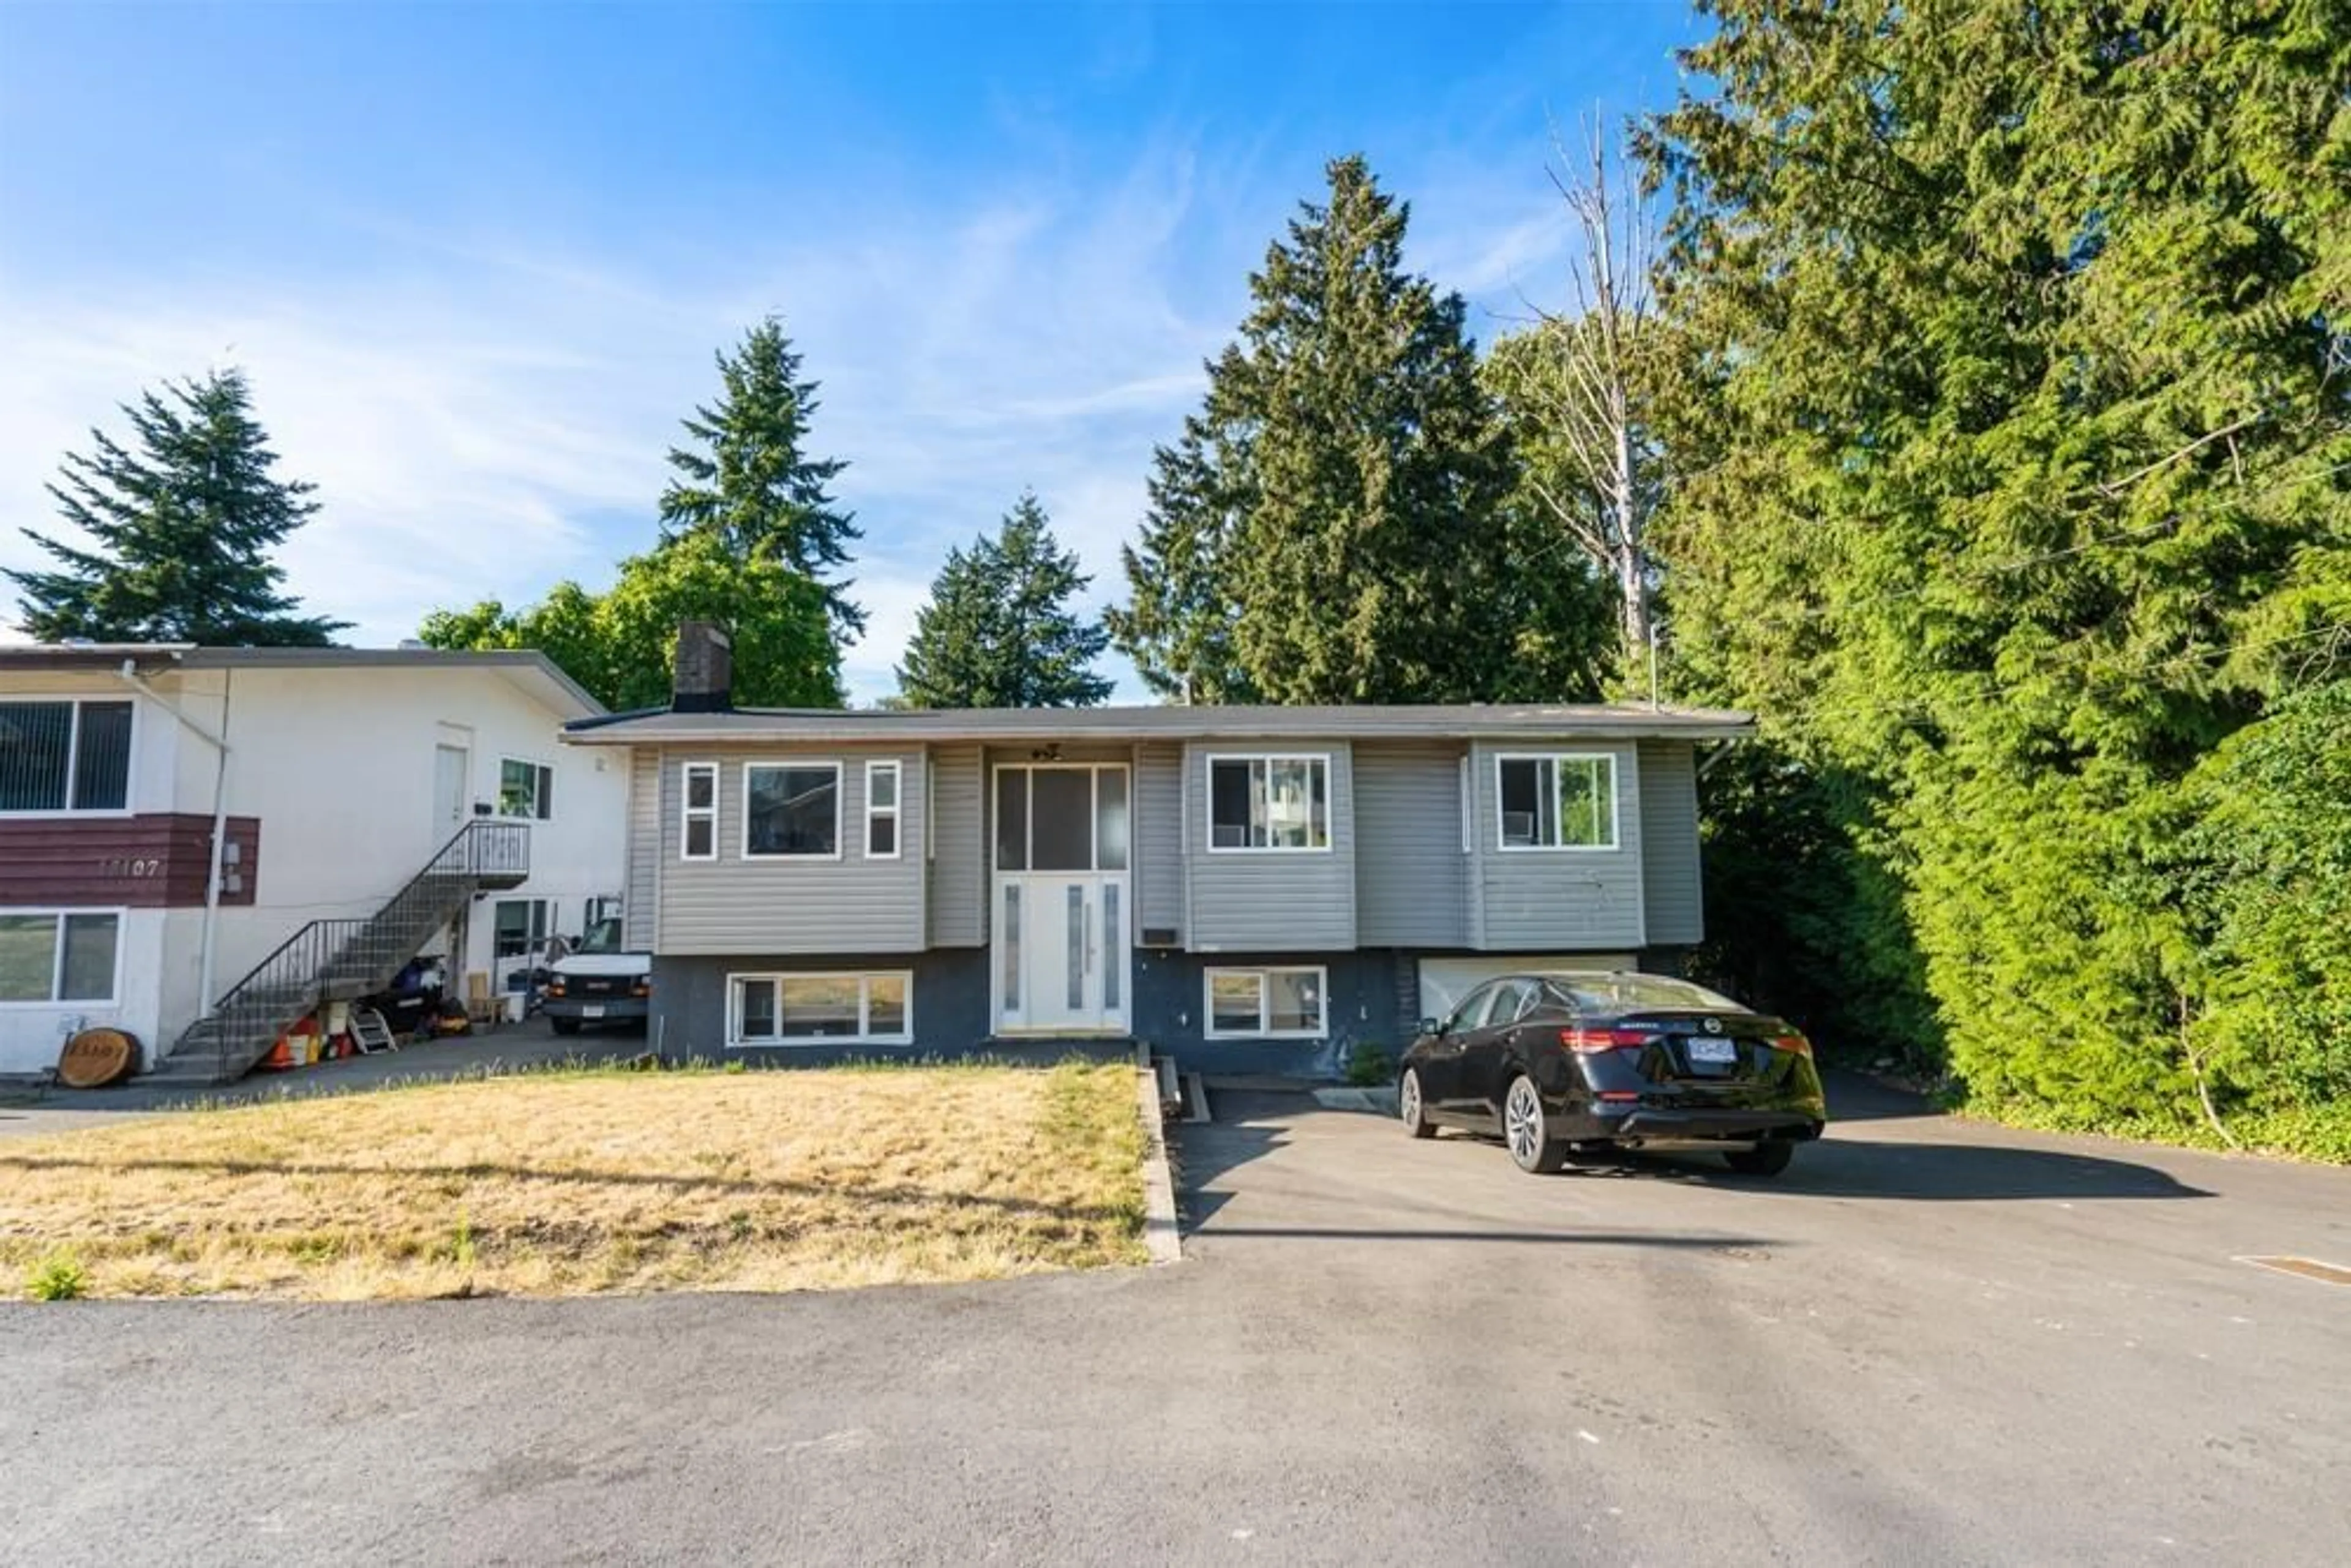 Frontside or backside of a home for 13115 107A AVENUE, Surrey British Columbia V3T2G9